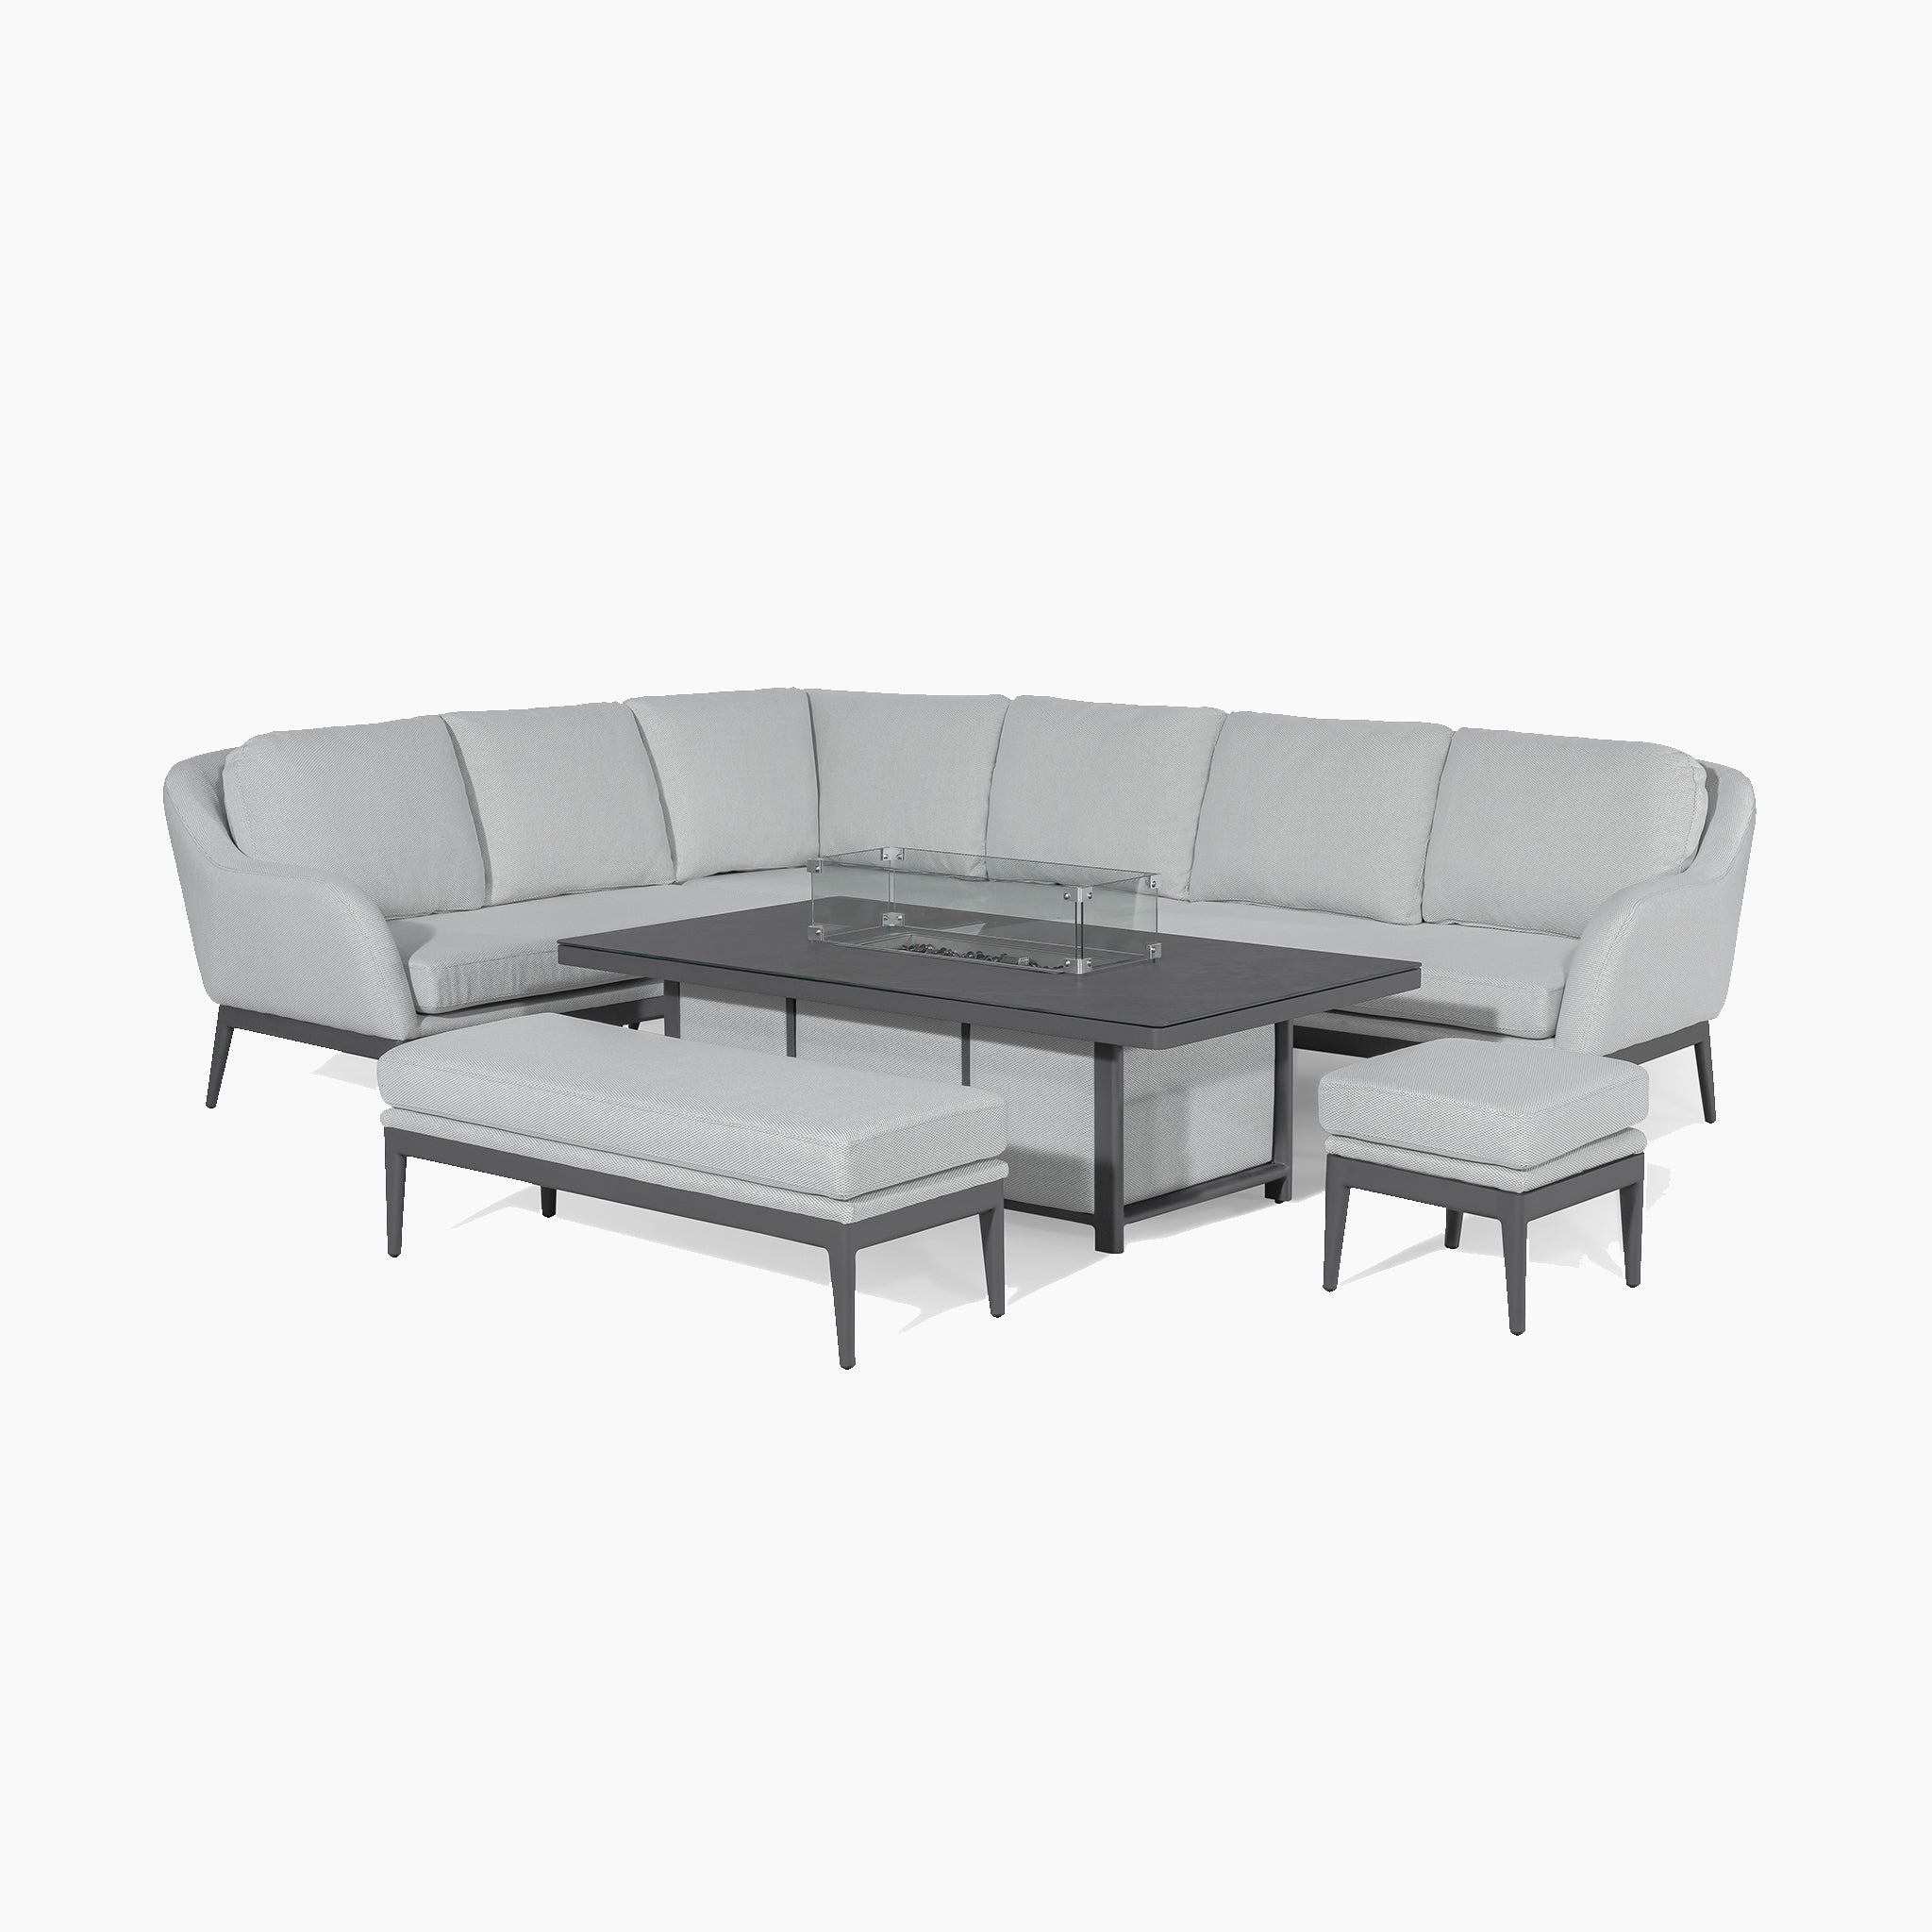 Luna Outdoor Fabric Rectangular Corner Dining Set with Rising Firepit Table in Oyster Grey (Left Hand)